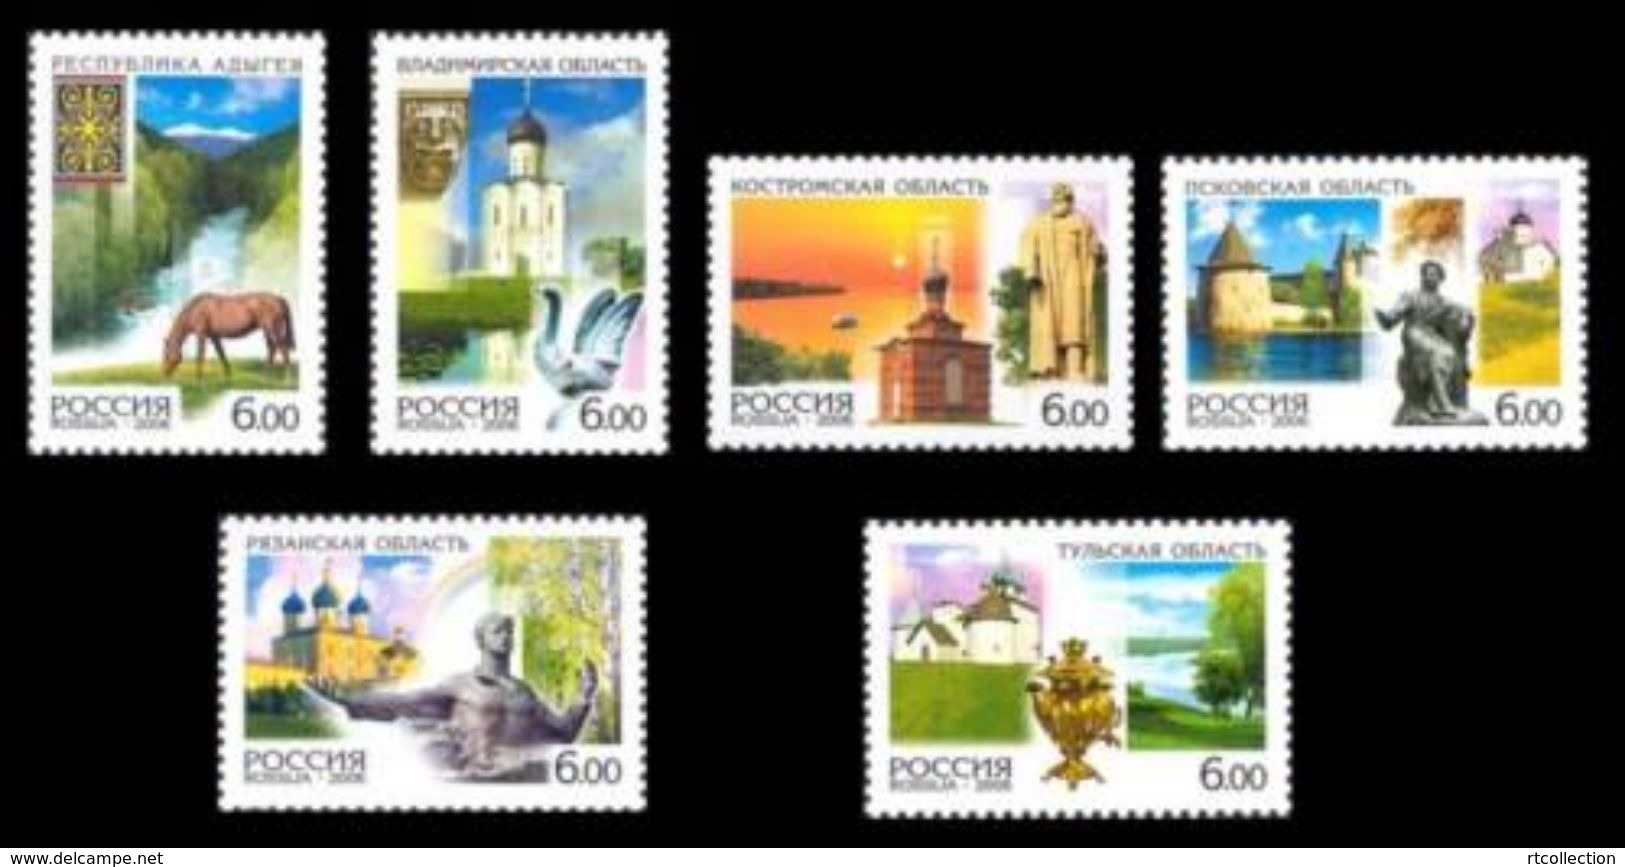 Russia 2006 Russian Regions Sightseeing Nature Architecture Monuments Sculpture ART Geography Horse Stamps MNH Mi 1353-8 - Monuments